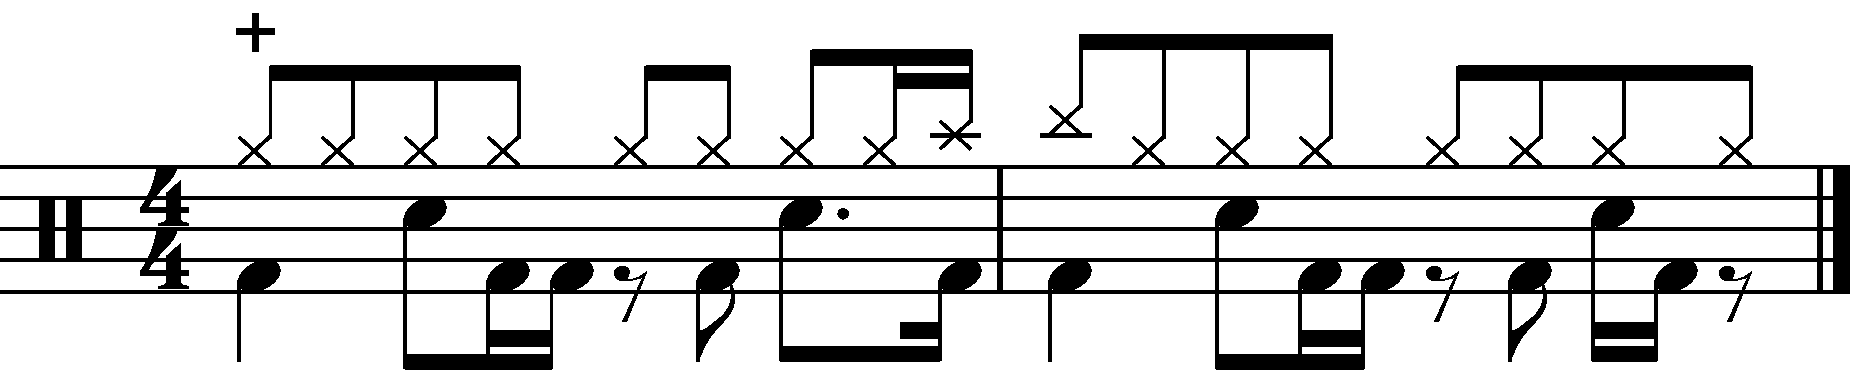 The concept applied to a common time groove with eighth note right hands